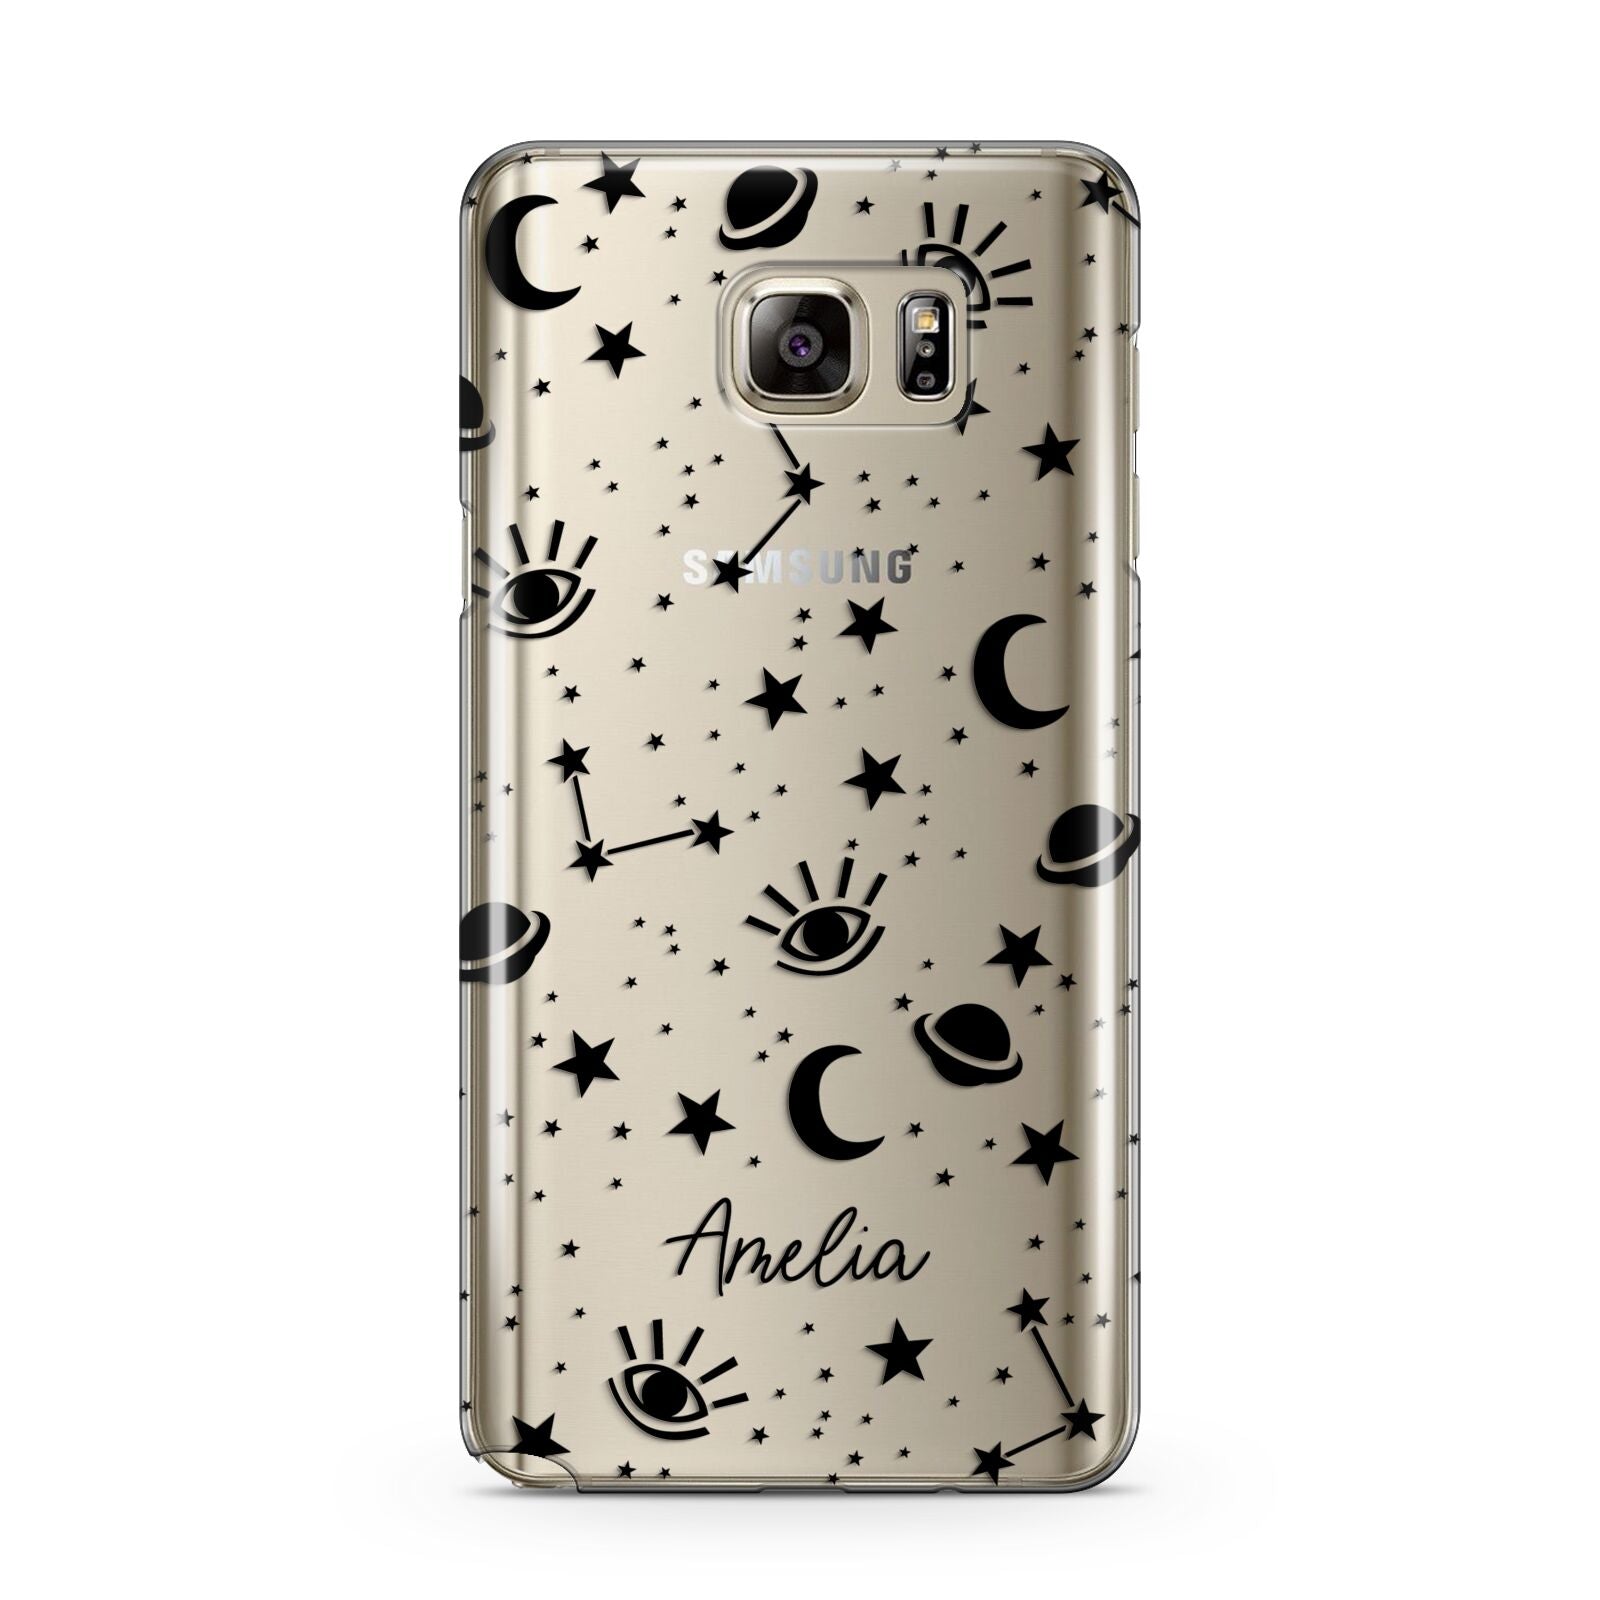 Monochrome Zodiac Constellations with Name Samsung Galaxy Note 5 Case